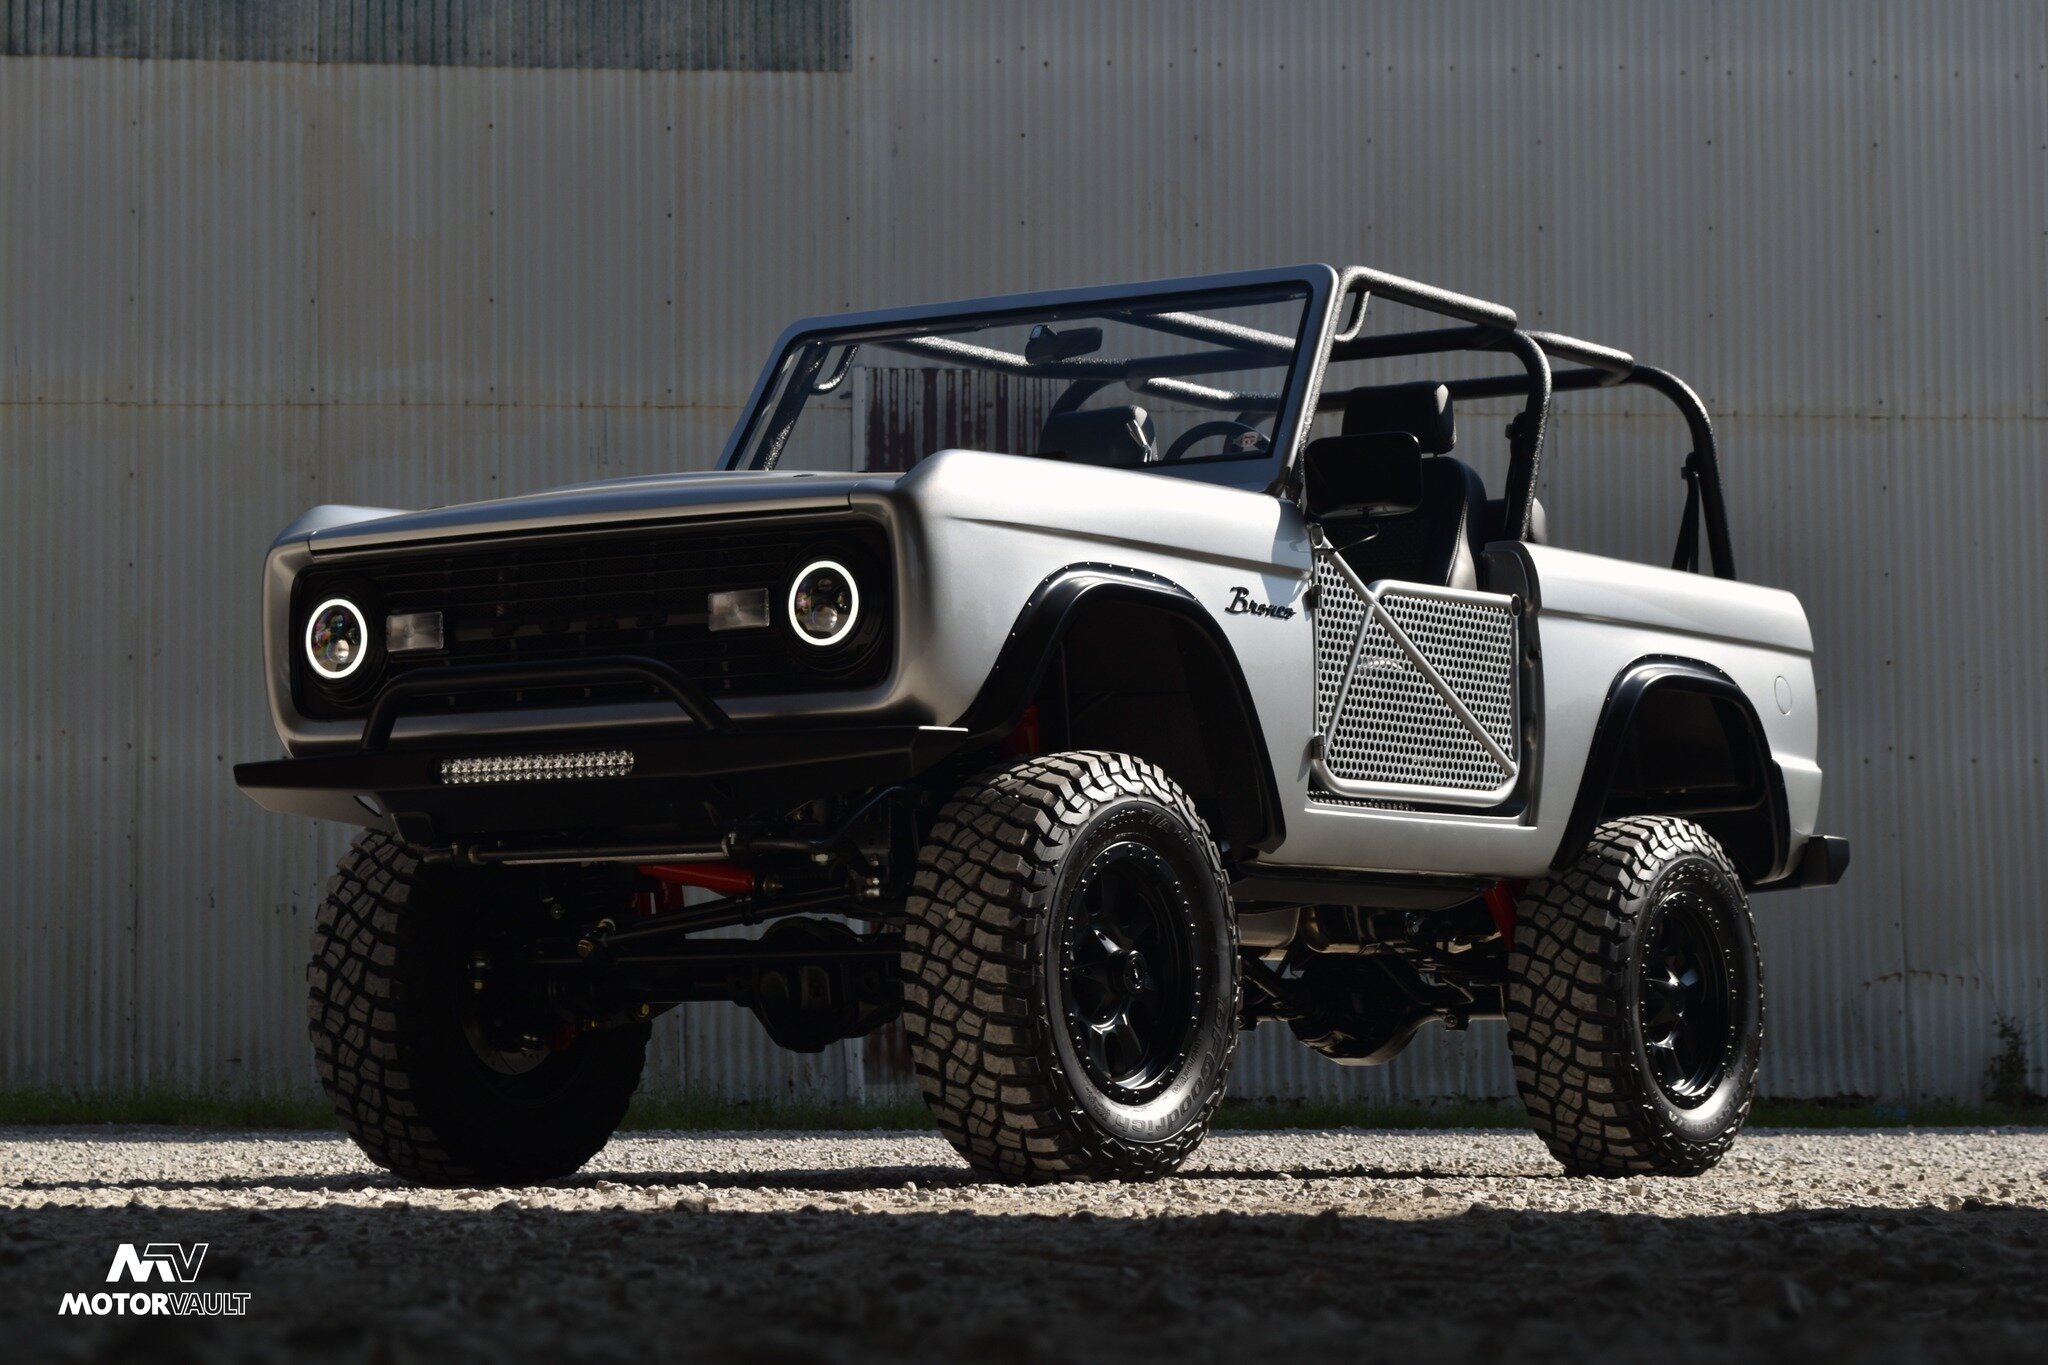 The 1973 Ford Bronco Resto-mod ends TODAY on Bring a Trailer! 

https://bringatrailer.com/listing/1973-ford-bronco-178/ 

#FordBronco #Restomod #indy #vehiclesforenthusiasts #bringatrailer #Fordcoyote #1970s #customcars #4x4